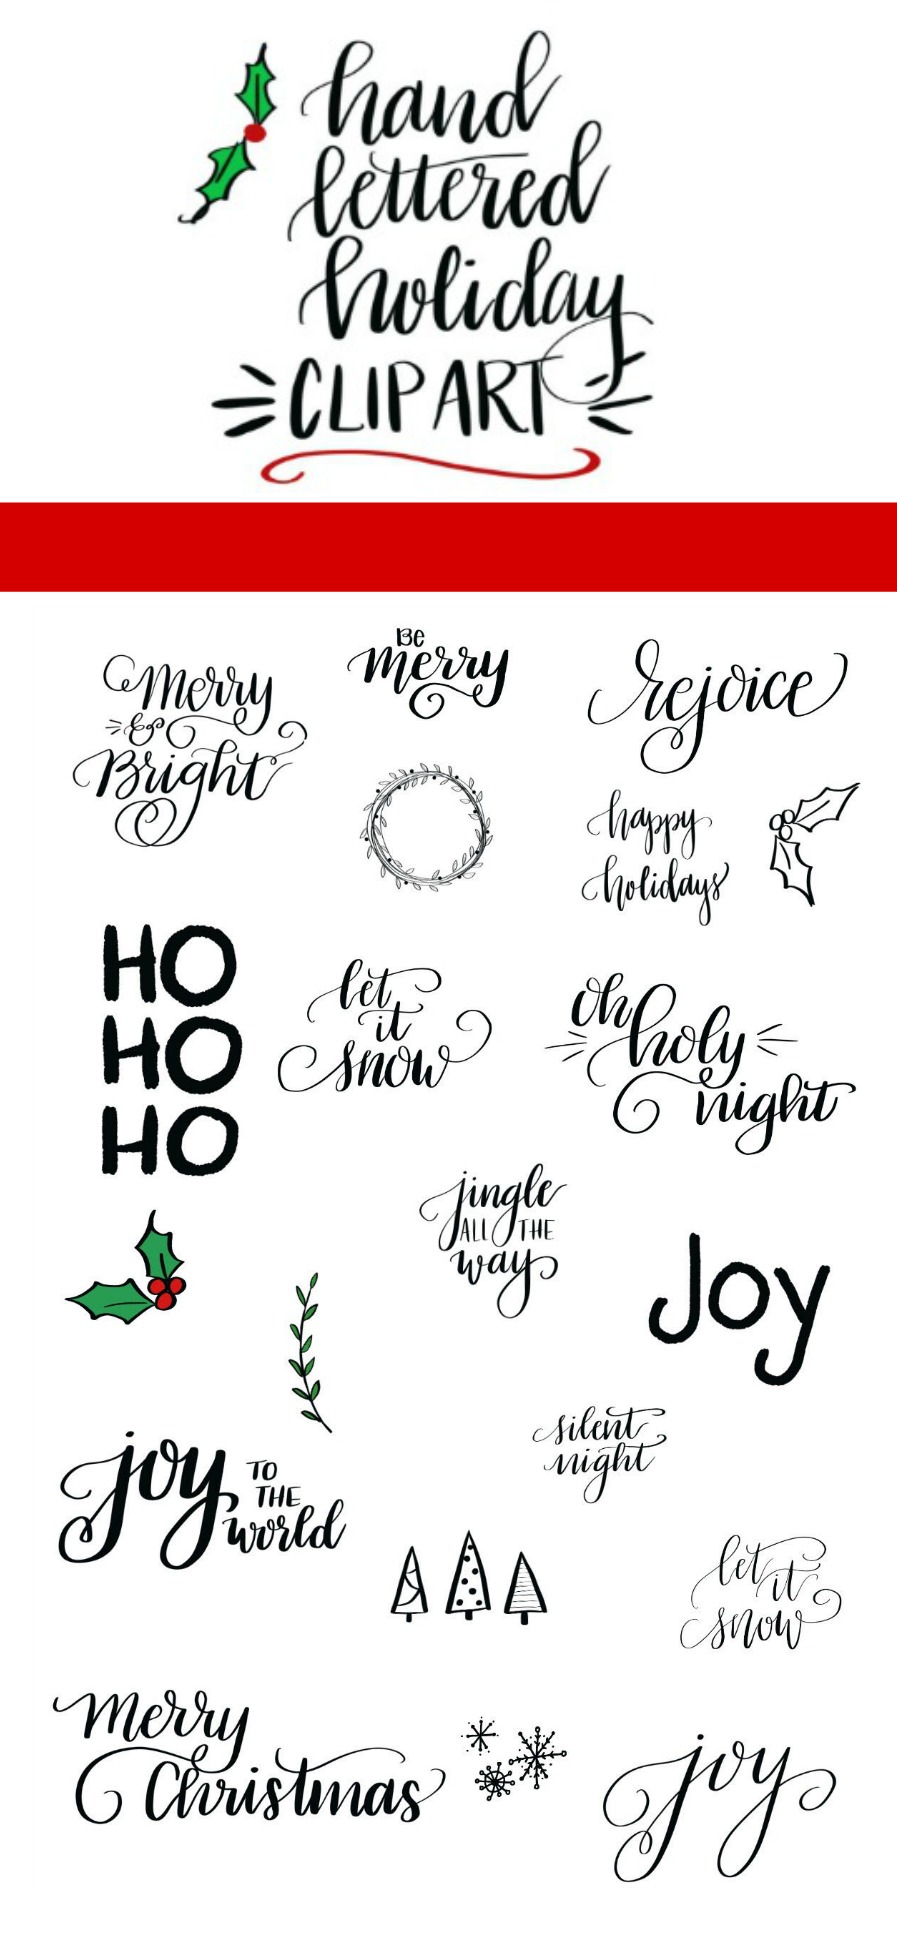 Hand Lettered Holiday Clip Art